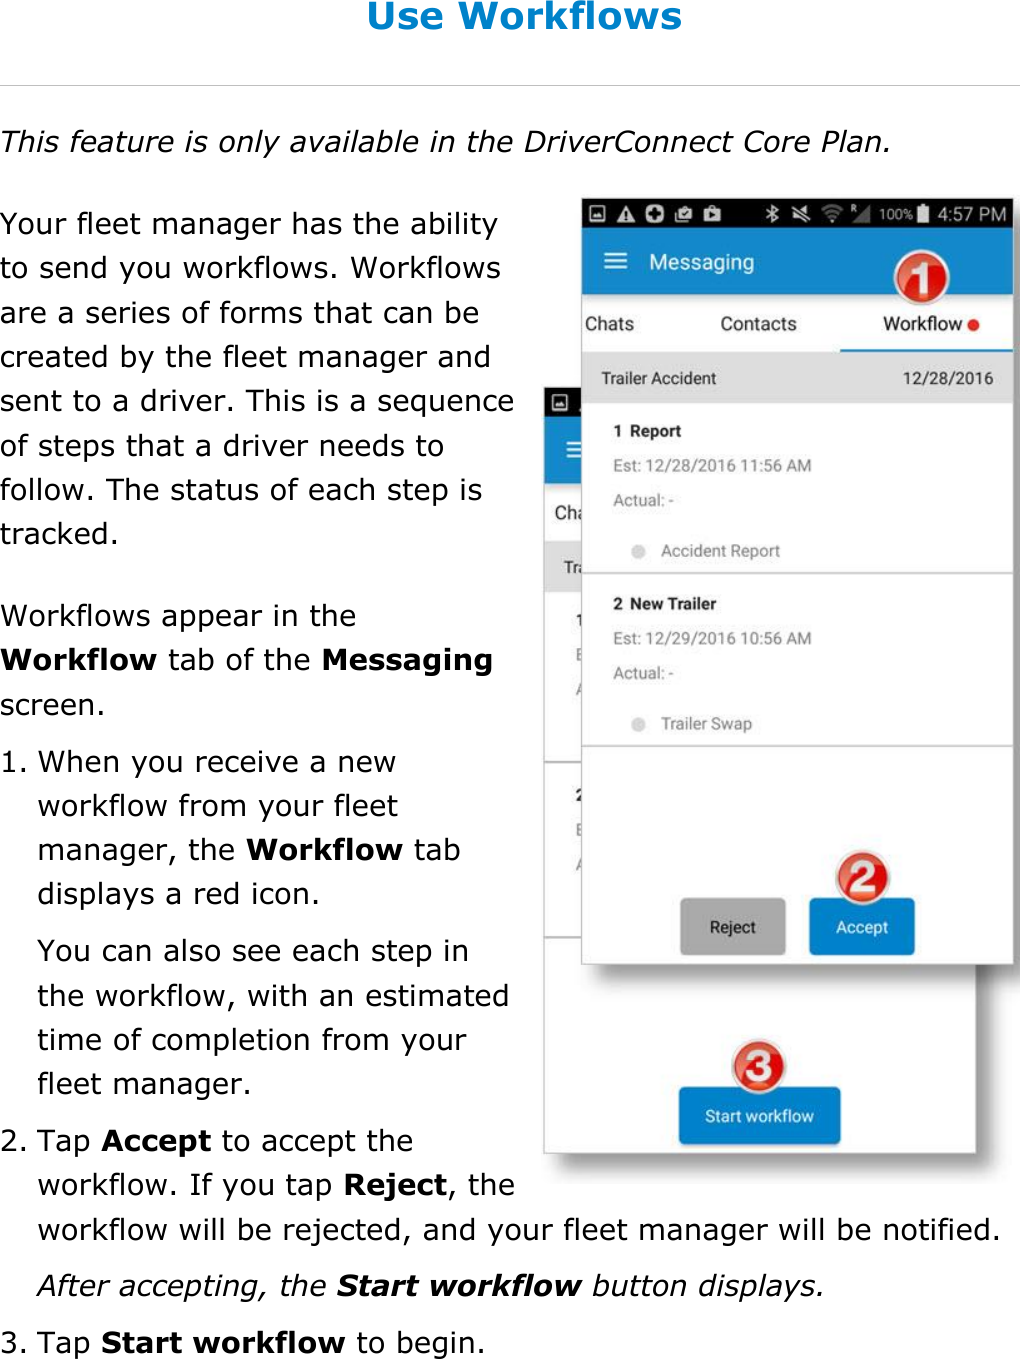 Send Messages, Forms, and Workflows DriverConnect User Guide  78 © 2017, Rand McNally, Inc. Use Workflows This feature is only available in the DriverConnect Core Plan. Your fleet manager has the ability to send you workflows. Workflows are a series of forms that can be created by the fleet manager and sent to a driver. This is a sequence of steps that a driver needs to follow. The status of each step is tracked. Workflows appear in the Workflow tab of the Messaging screen. 1. When you receive a new workflow from your fleet manager, the Workflow tab displays a red icon. You can also see each step in the workflow, with an estimated time of completion from your fleet manager. 2. Tap Accept to accept the workflow. If you tap Reject, the workflow will be rejected, and your fleet manager will be notified. After accepting, the Start workflow button displays. 3. Tap Start workflow to begin.   